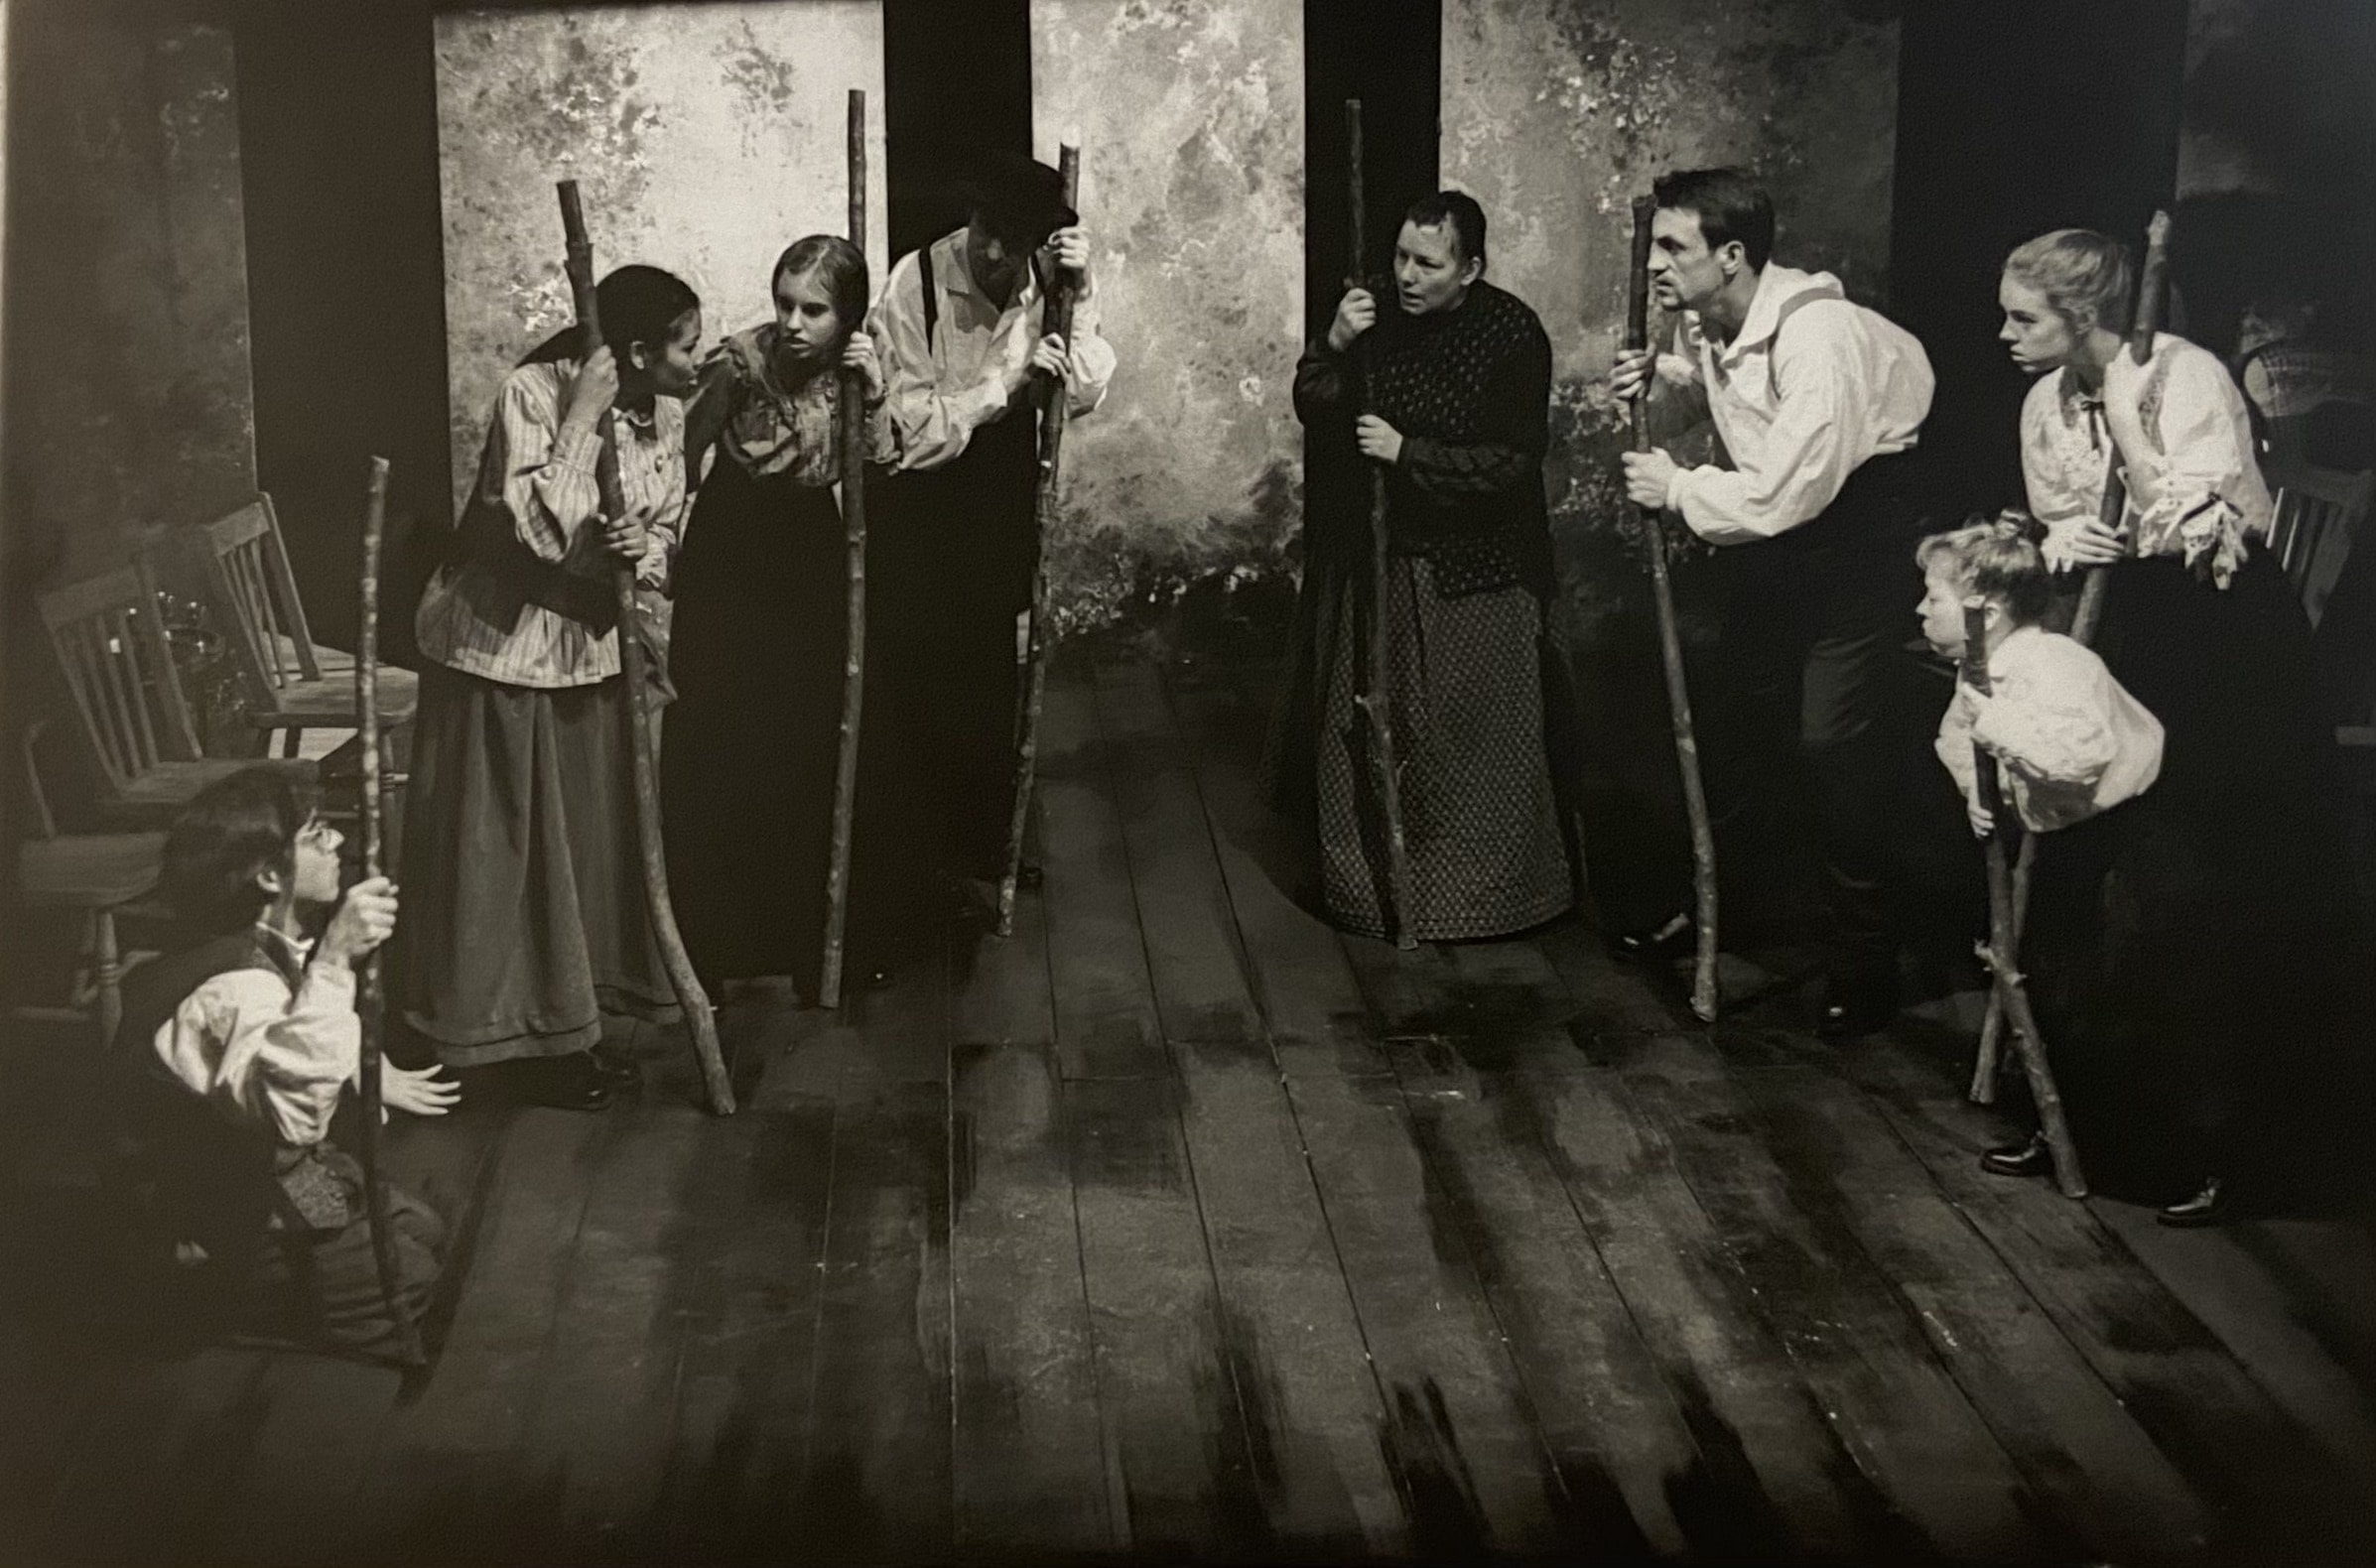 A black and white image of a group of performers standing in a circle holding large wooden stalfs.